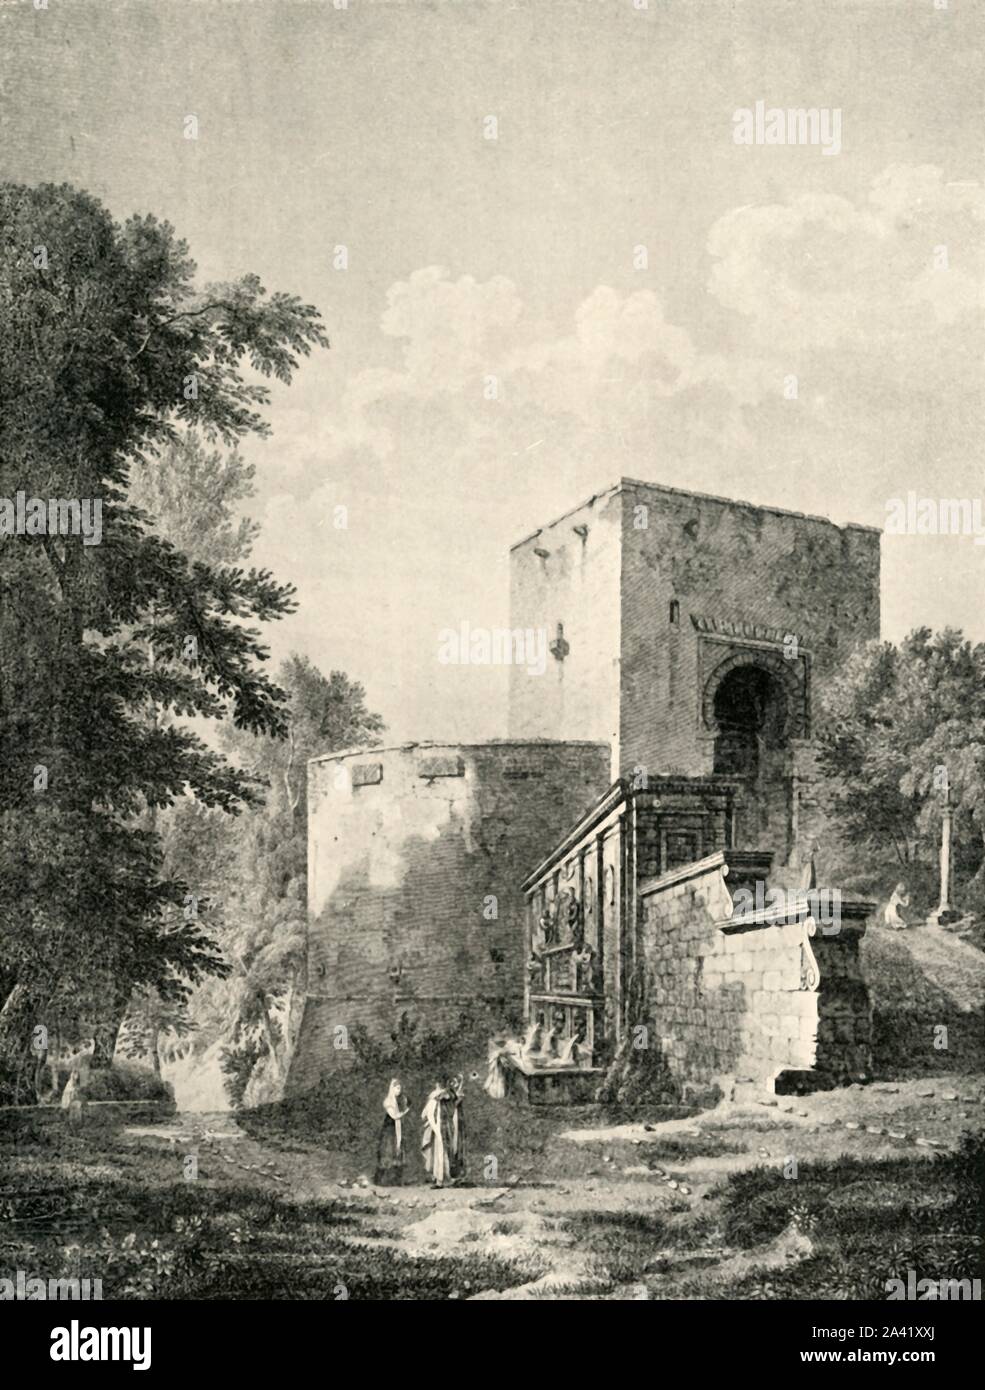 'Chief gate of the Alhambra', 19th century, (1907). The Gate of Justice (Puerta de la Justicia) built by Yusuf I in 1348, the original entrance gate to the Alhambra, Granada, Spain, which mainly dates from the 14th century. From &quot;The Alhambra: being a brief record of the Arabian conquest of the Peninsula with a particular account of the Mohammedan architecture and decoration&quot; by Albert F. Calvert. [John Lane, London &amp; New York, 1907] Stock Photo